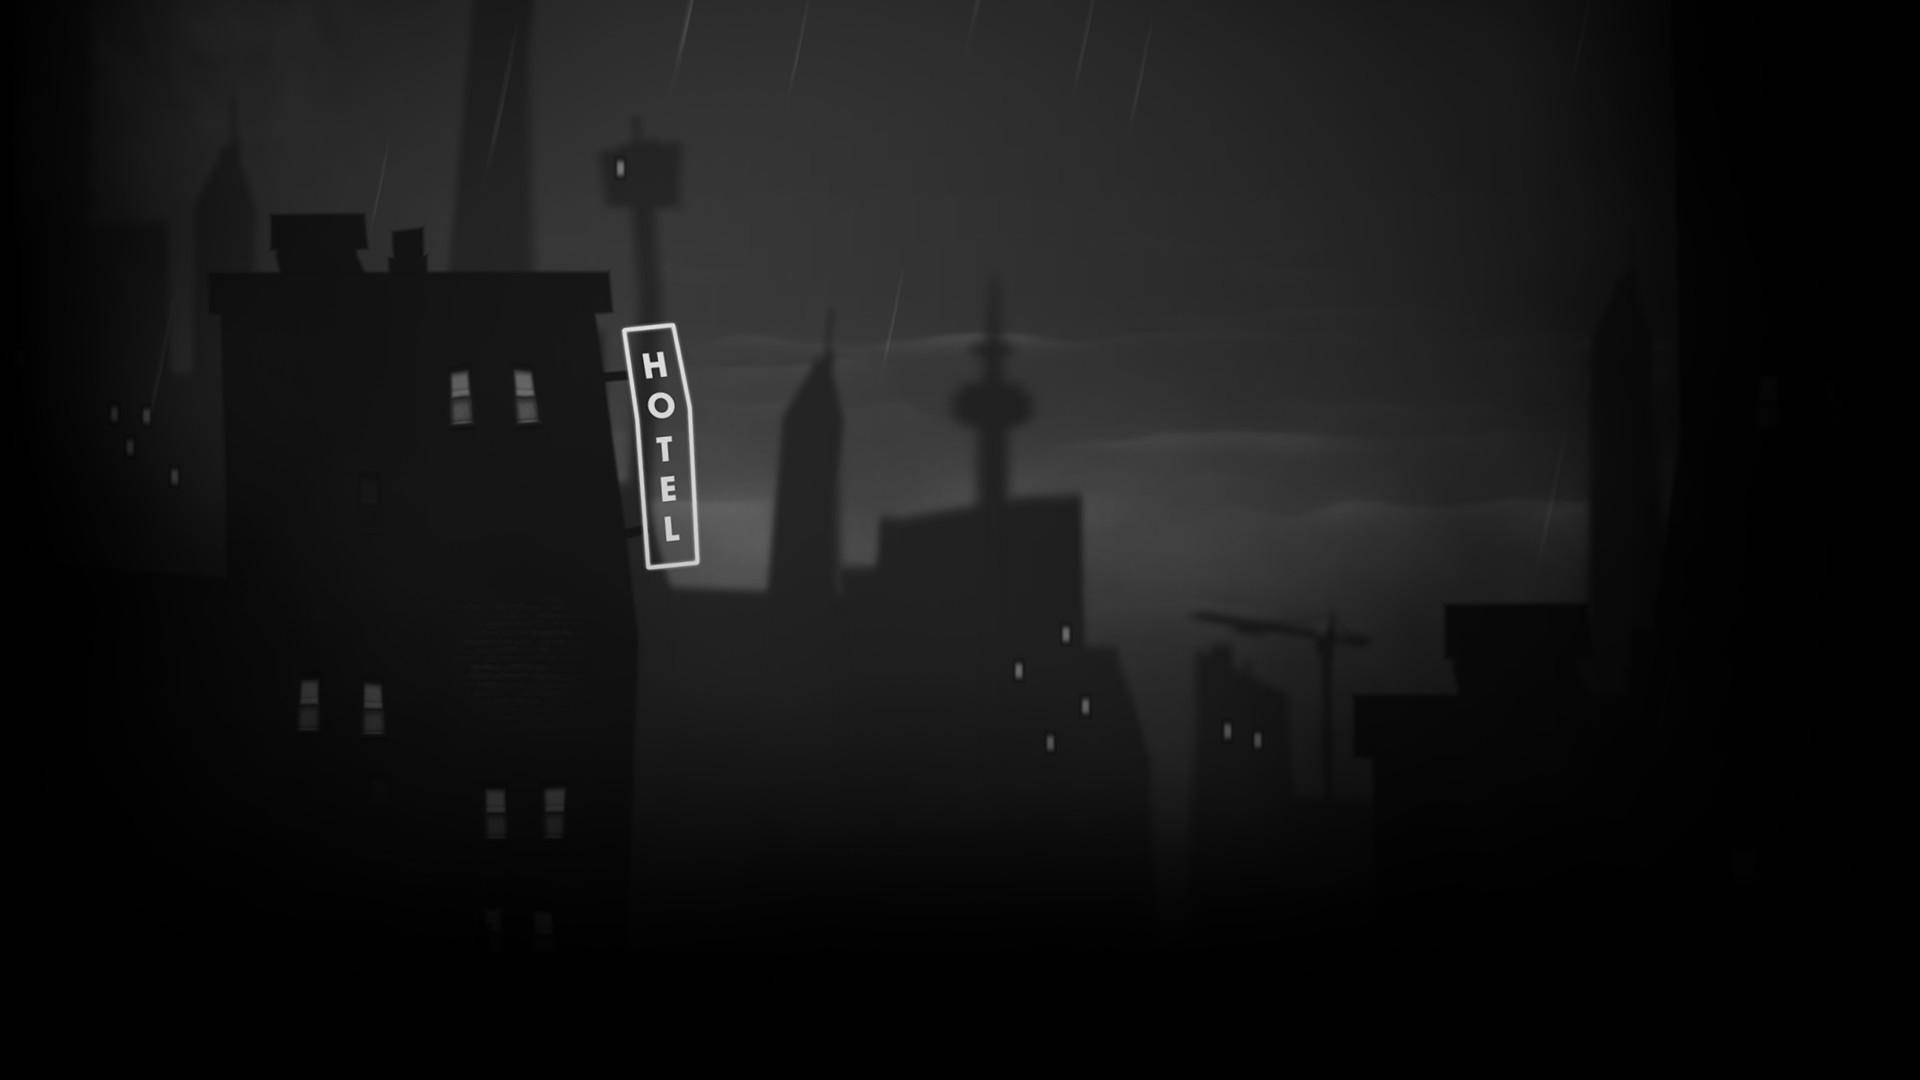 Simple Black City With Hotel Sign Wallpaper